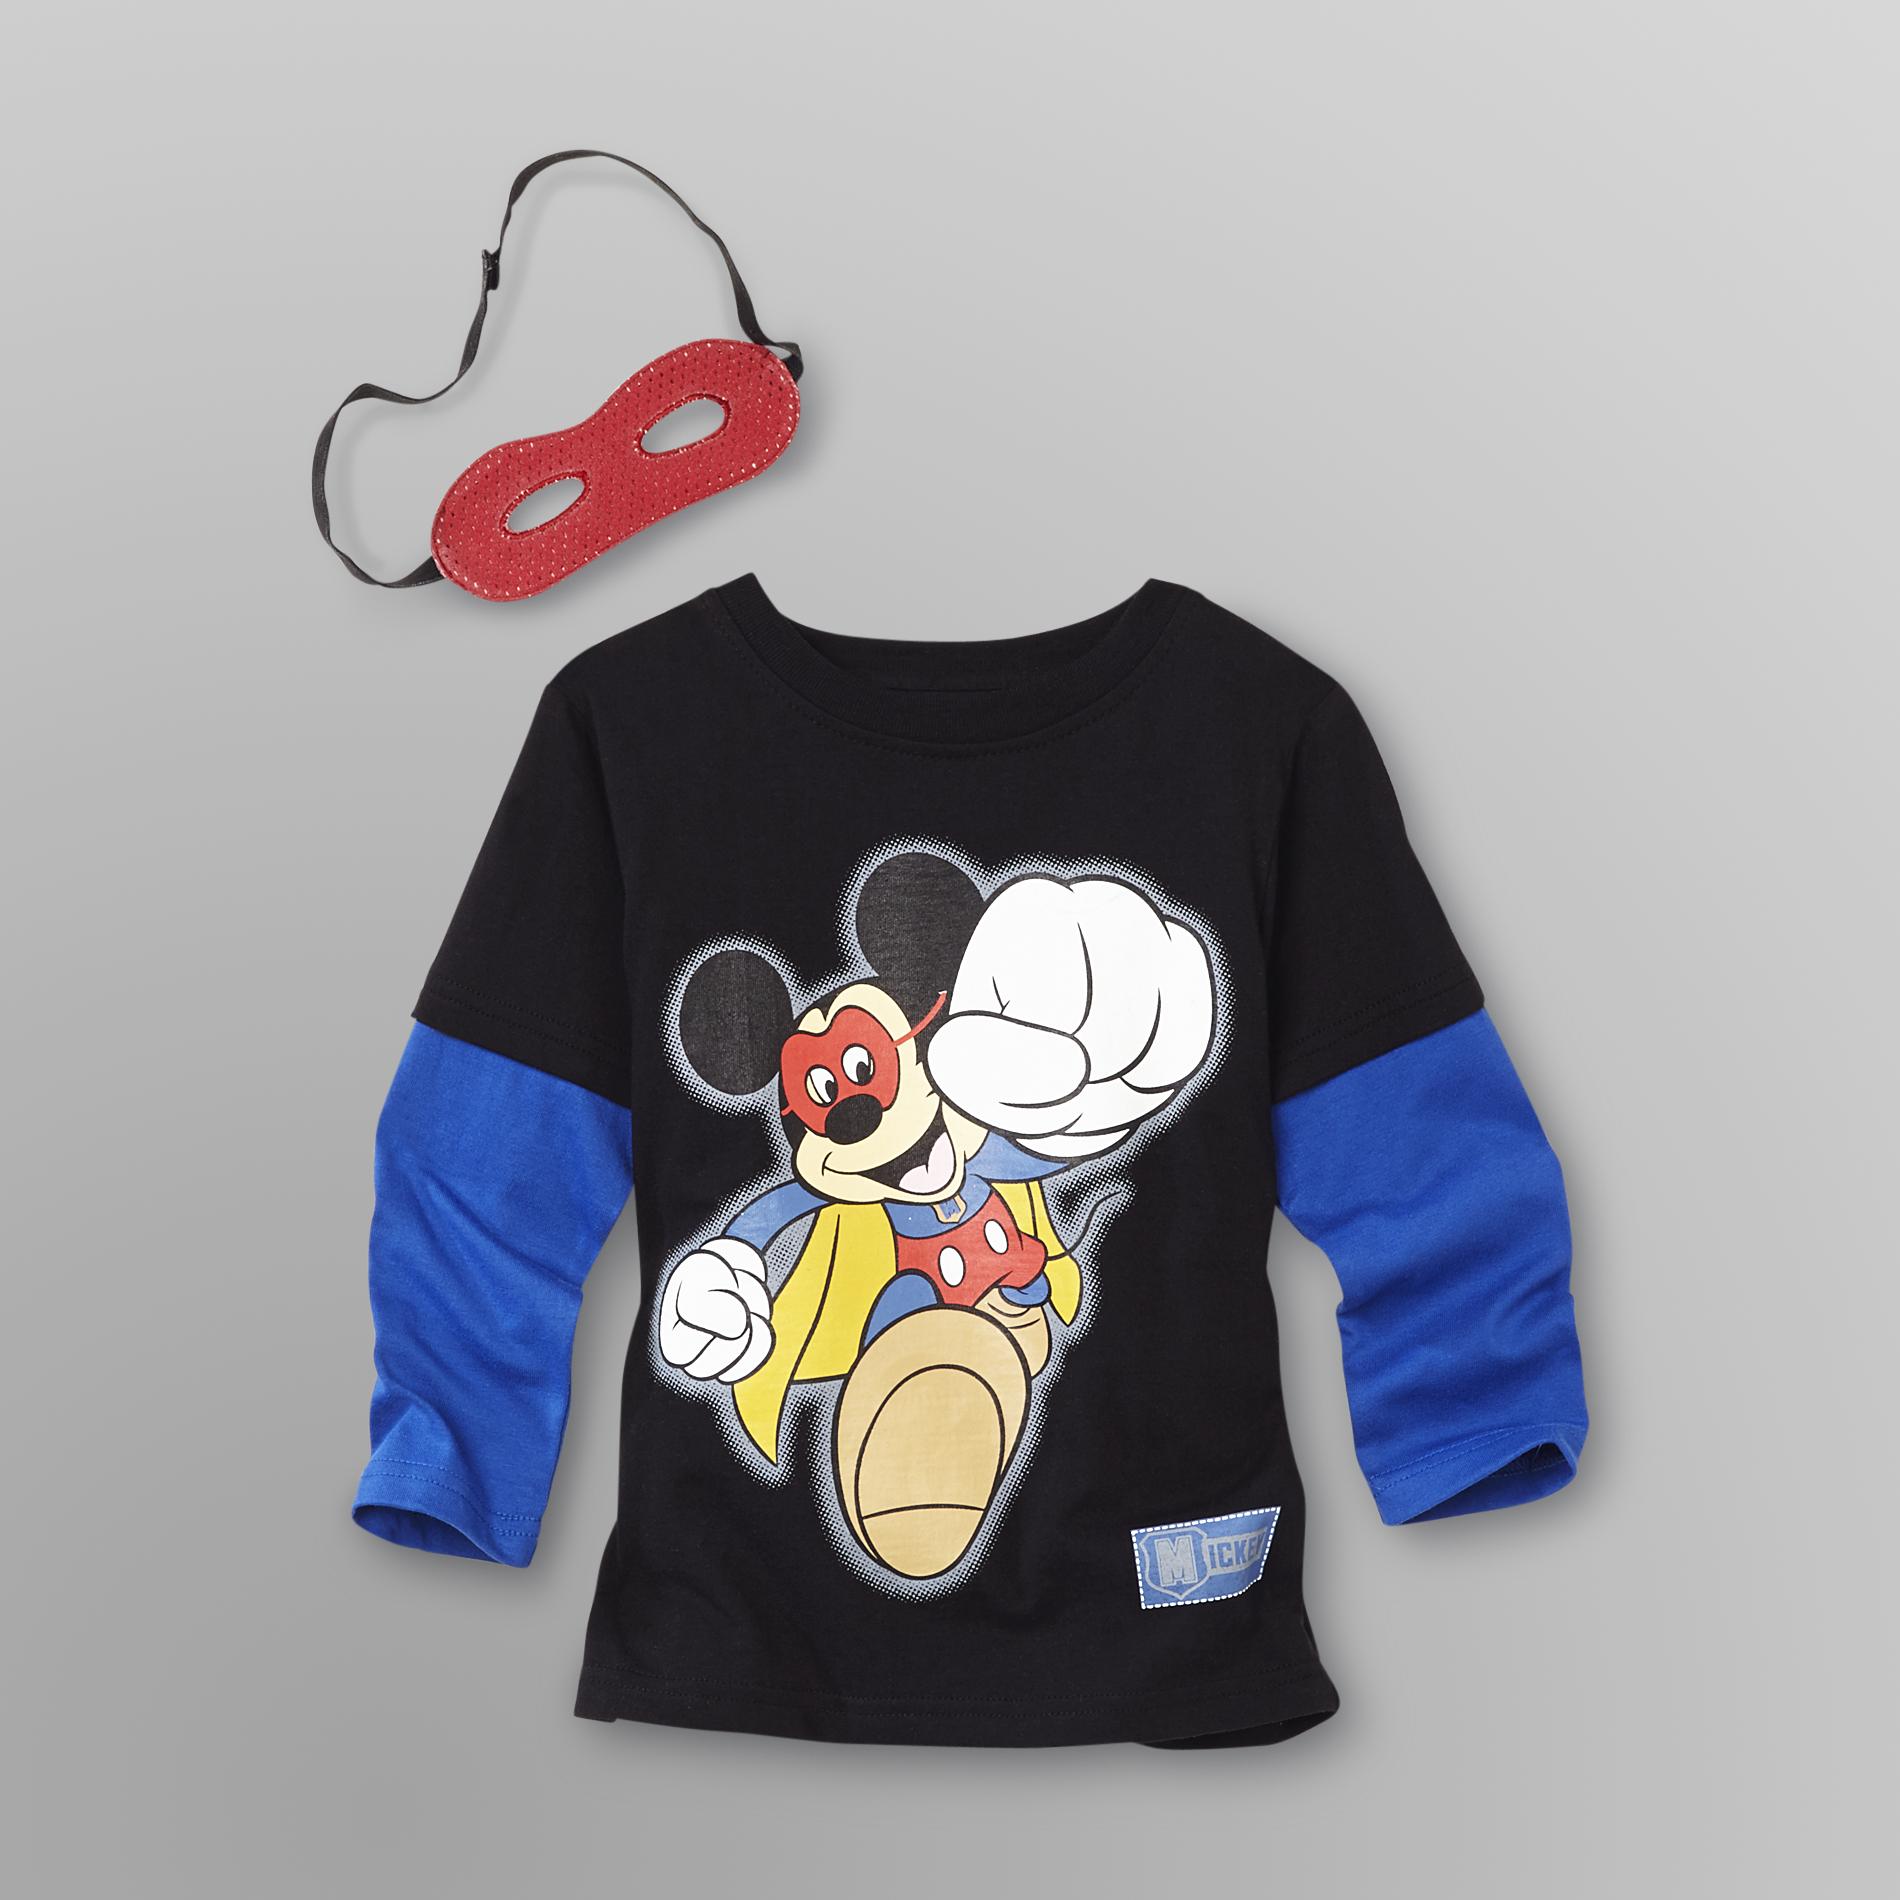 Disney Mickey Mouse Toddler Boy's T-Shirt  Cape & Mask